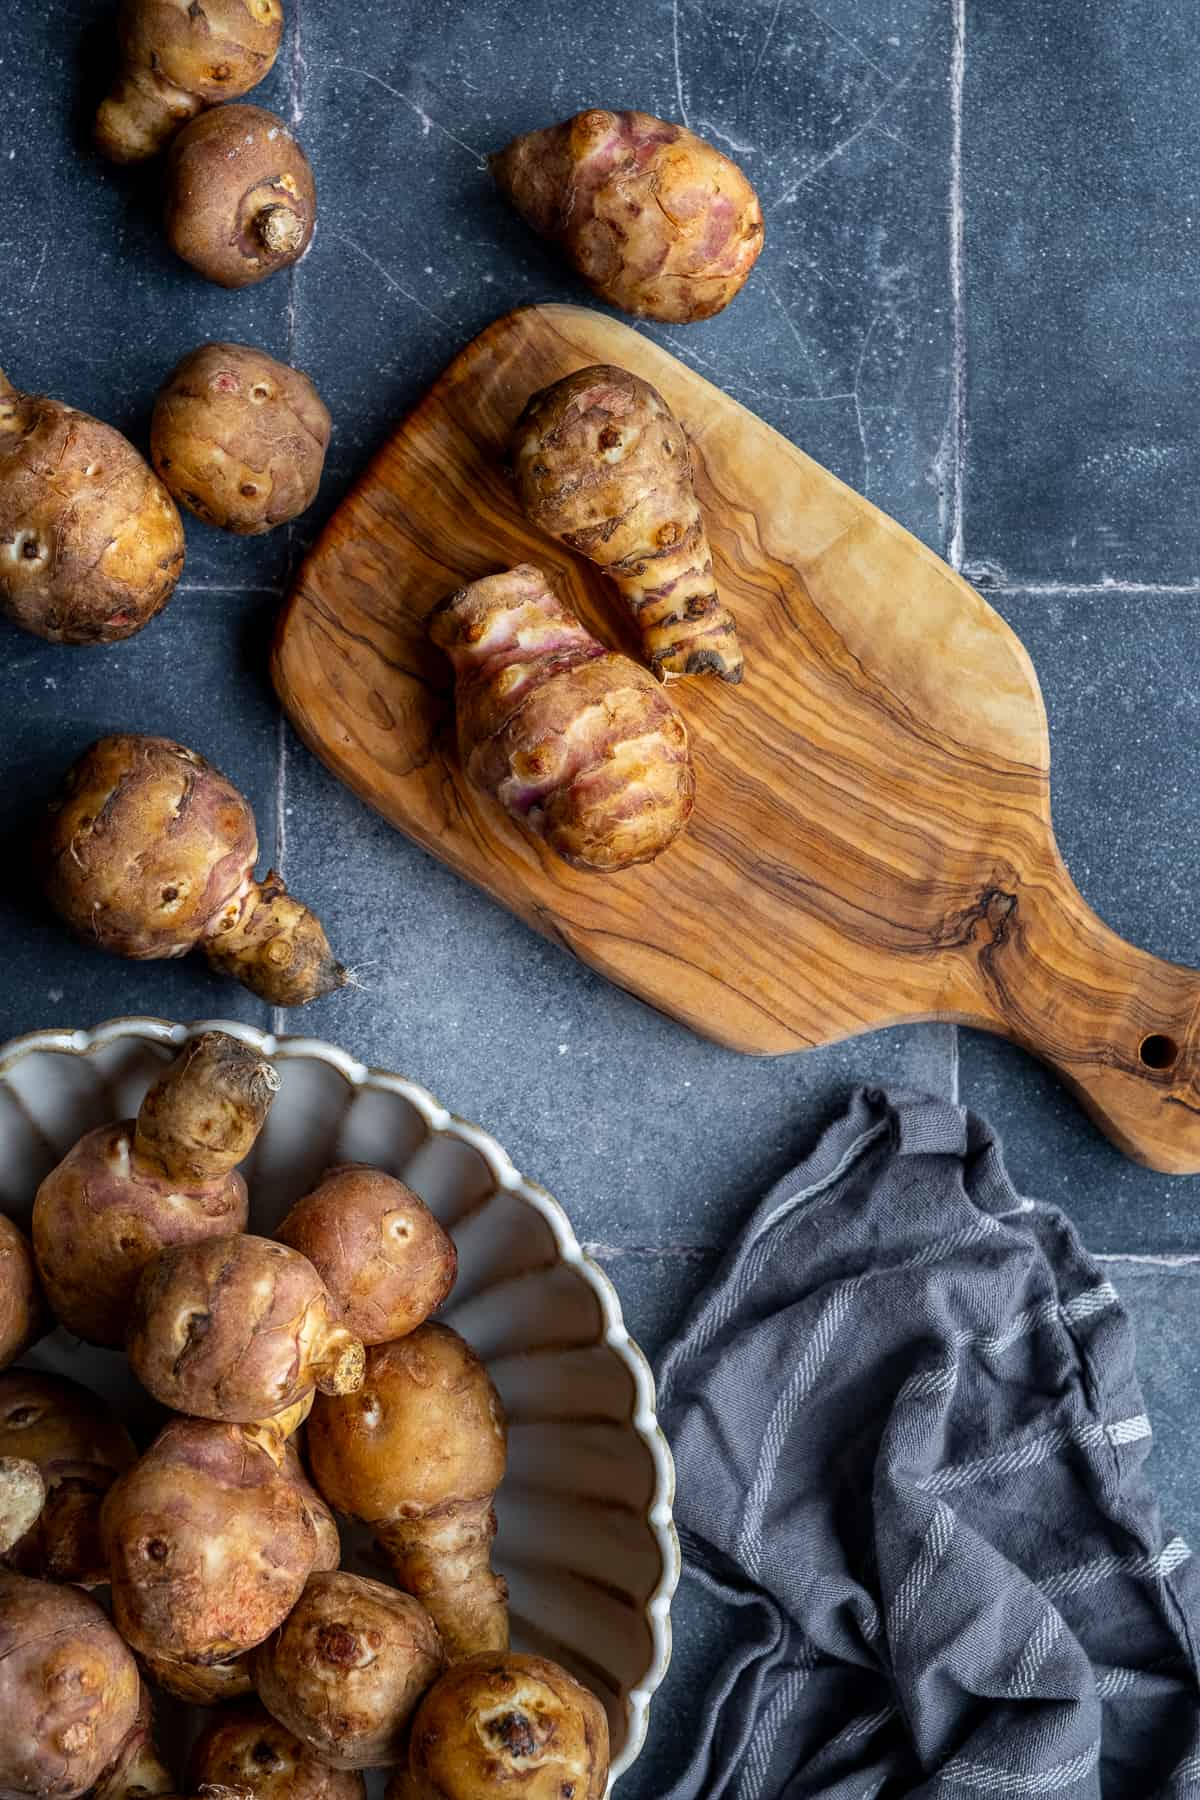 Jerusalem artichokes on a wooden cutting board and in a large bowl photographed on a dark background.